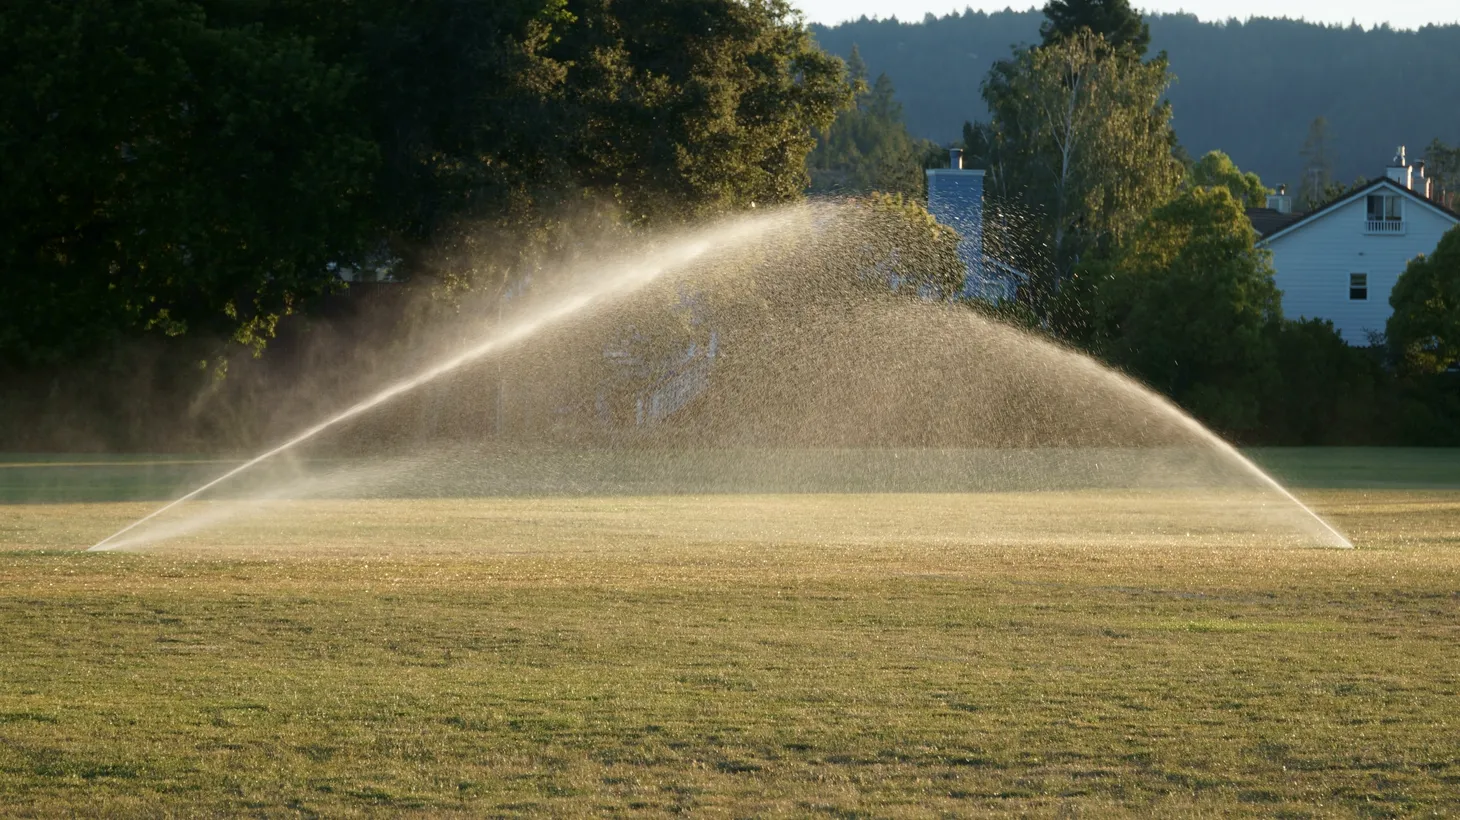 If the drought is so bad, why aren’t we feeling it in LA so far?